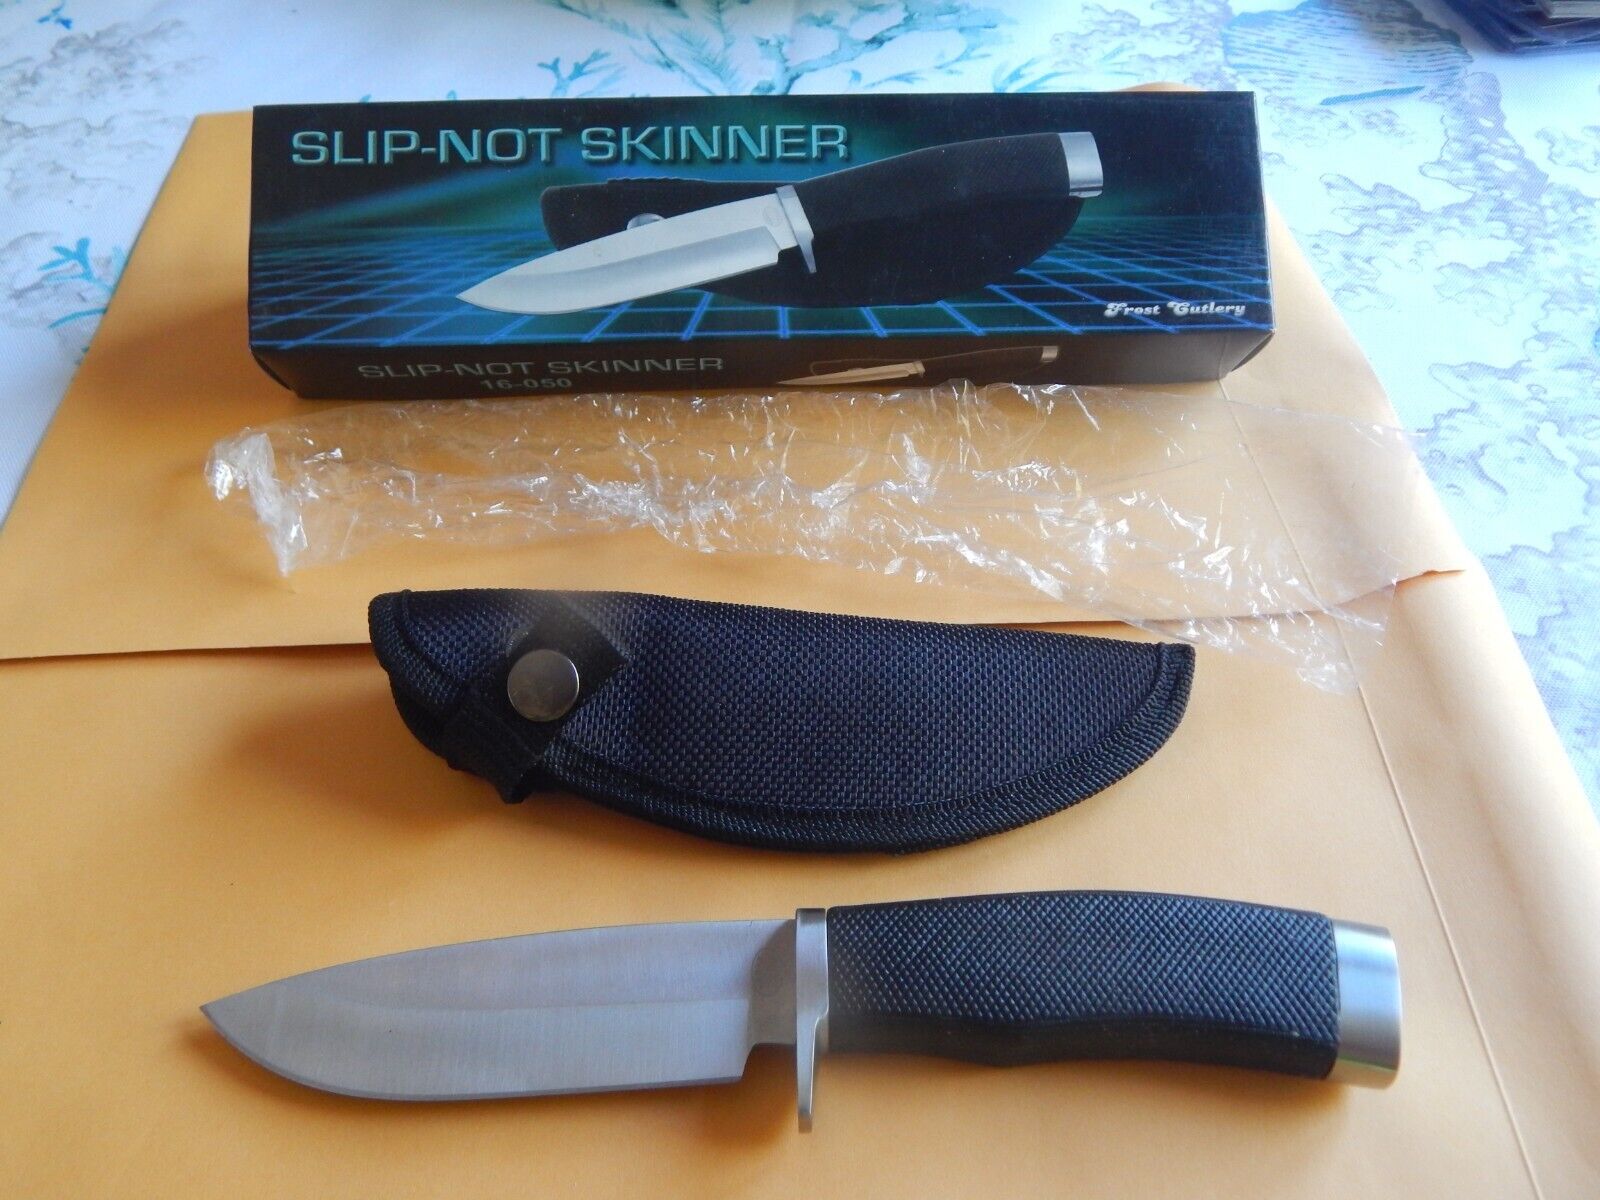 Beautiful Frost Cutlery Slip-Not Skinner Fixed Blade Knife With Sheath & Box New